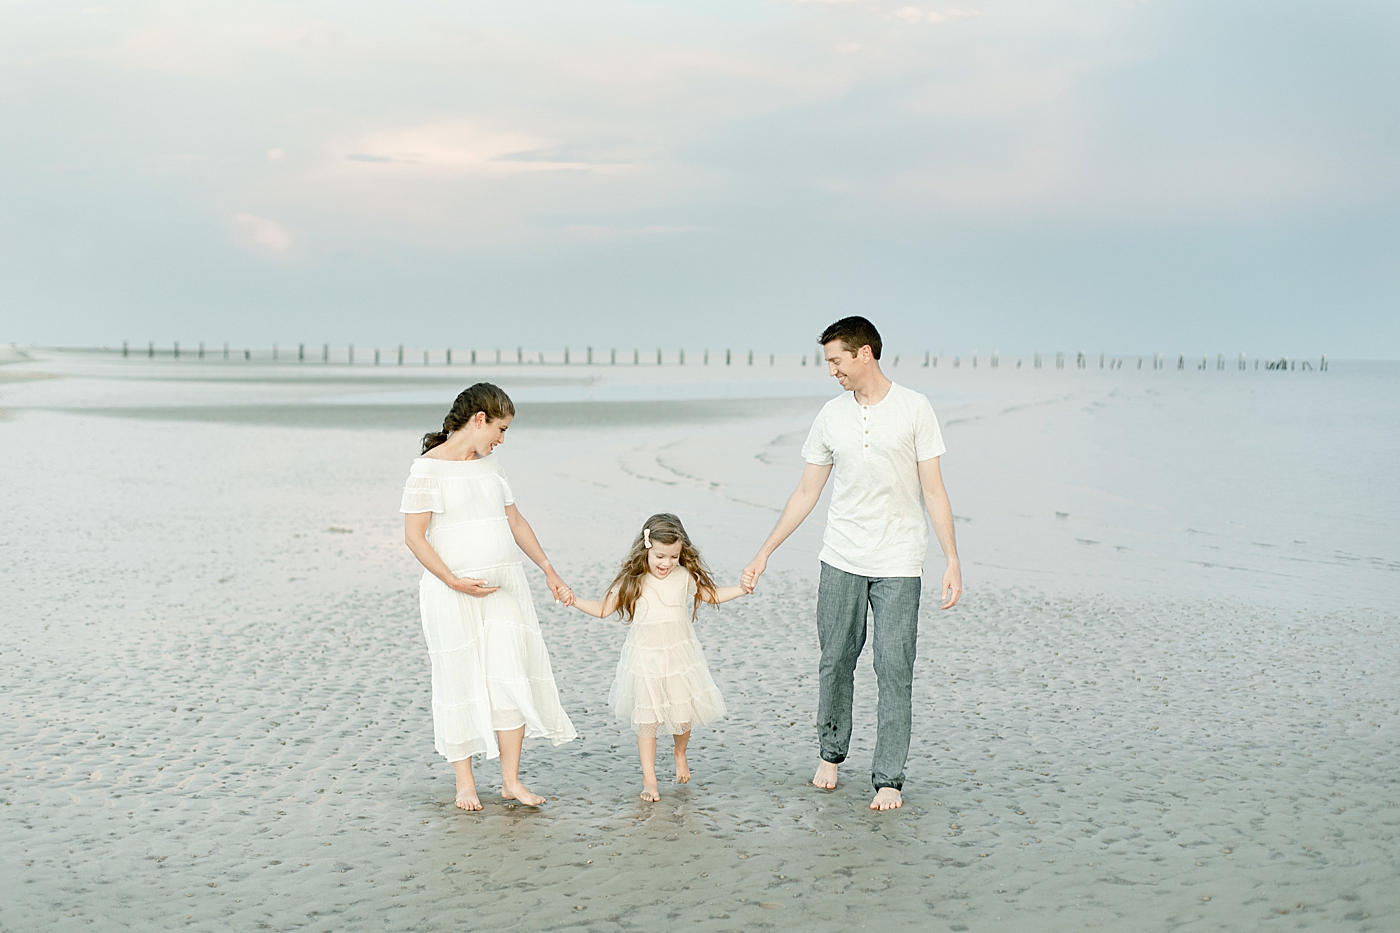 Sunset during family session on the beach. Photo by Little Sunshine Photography.